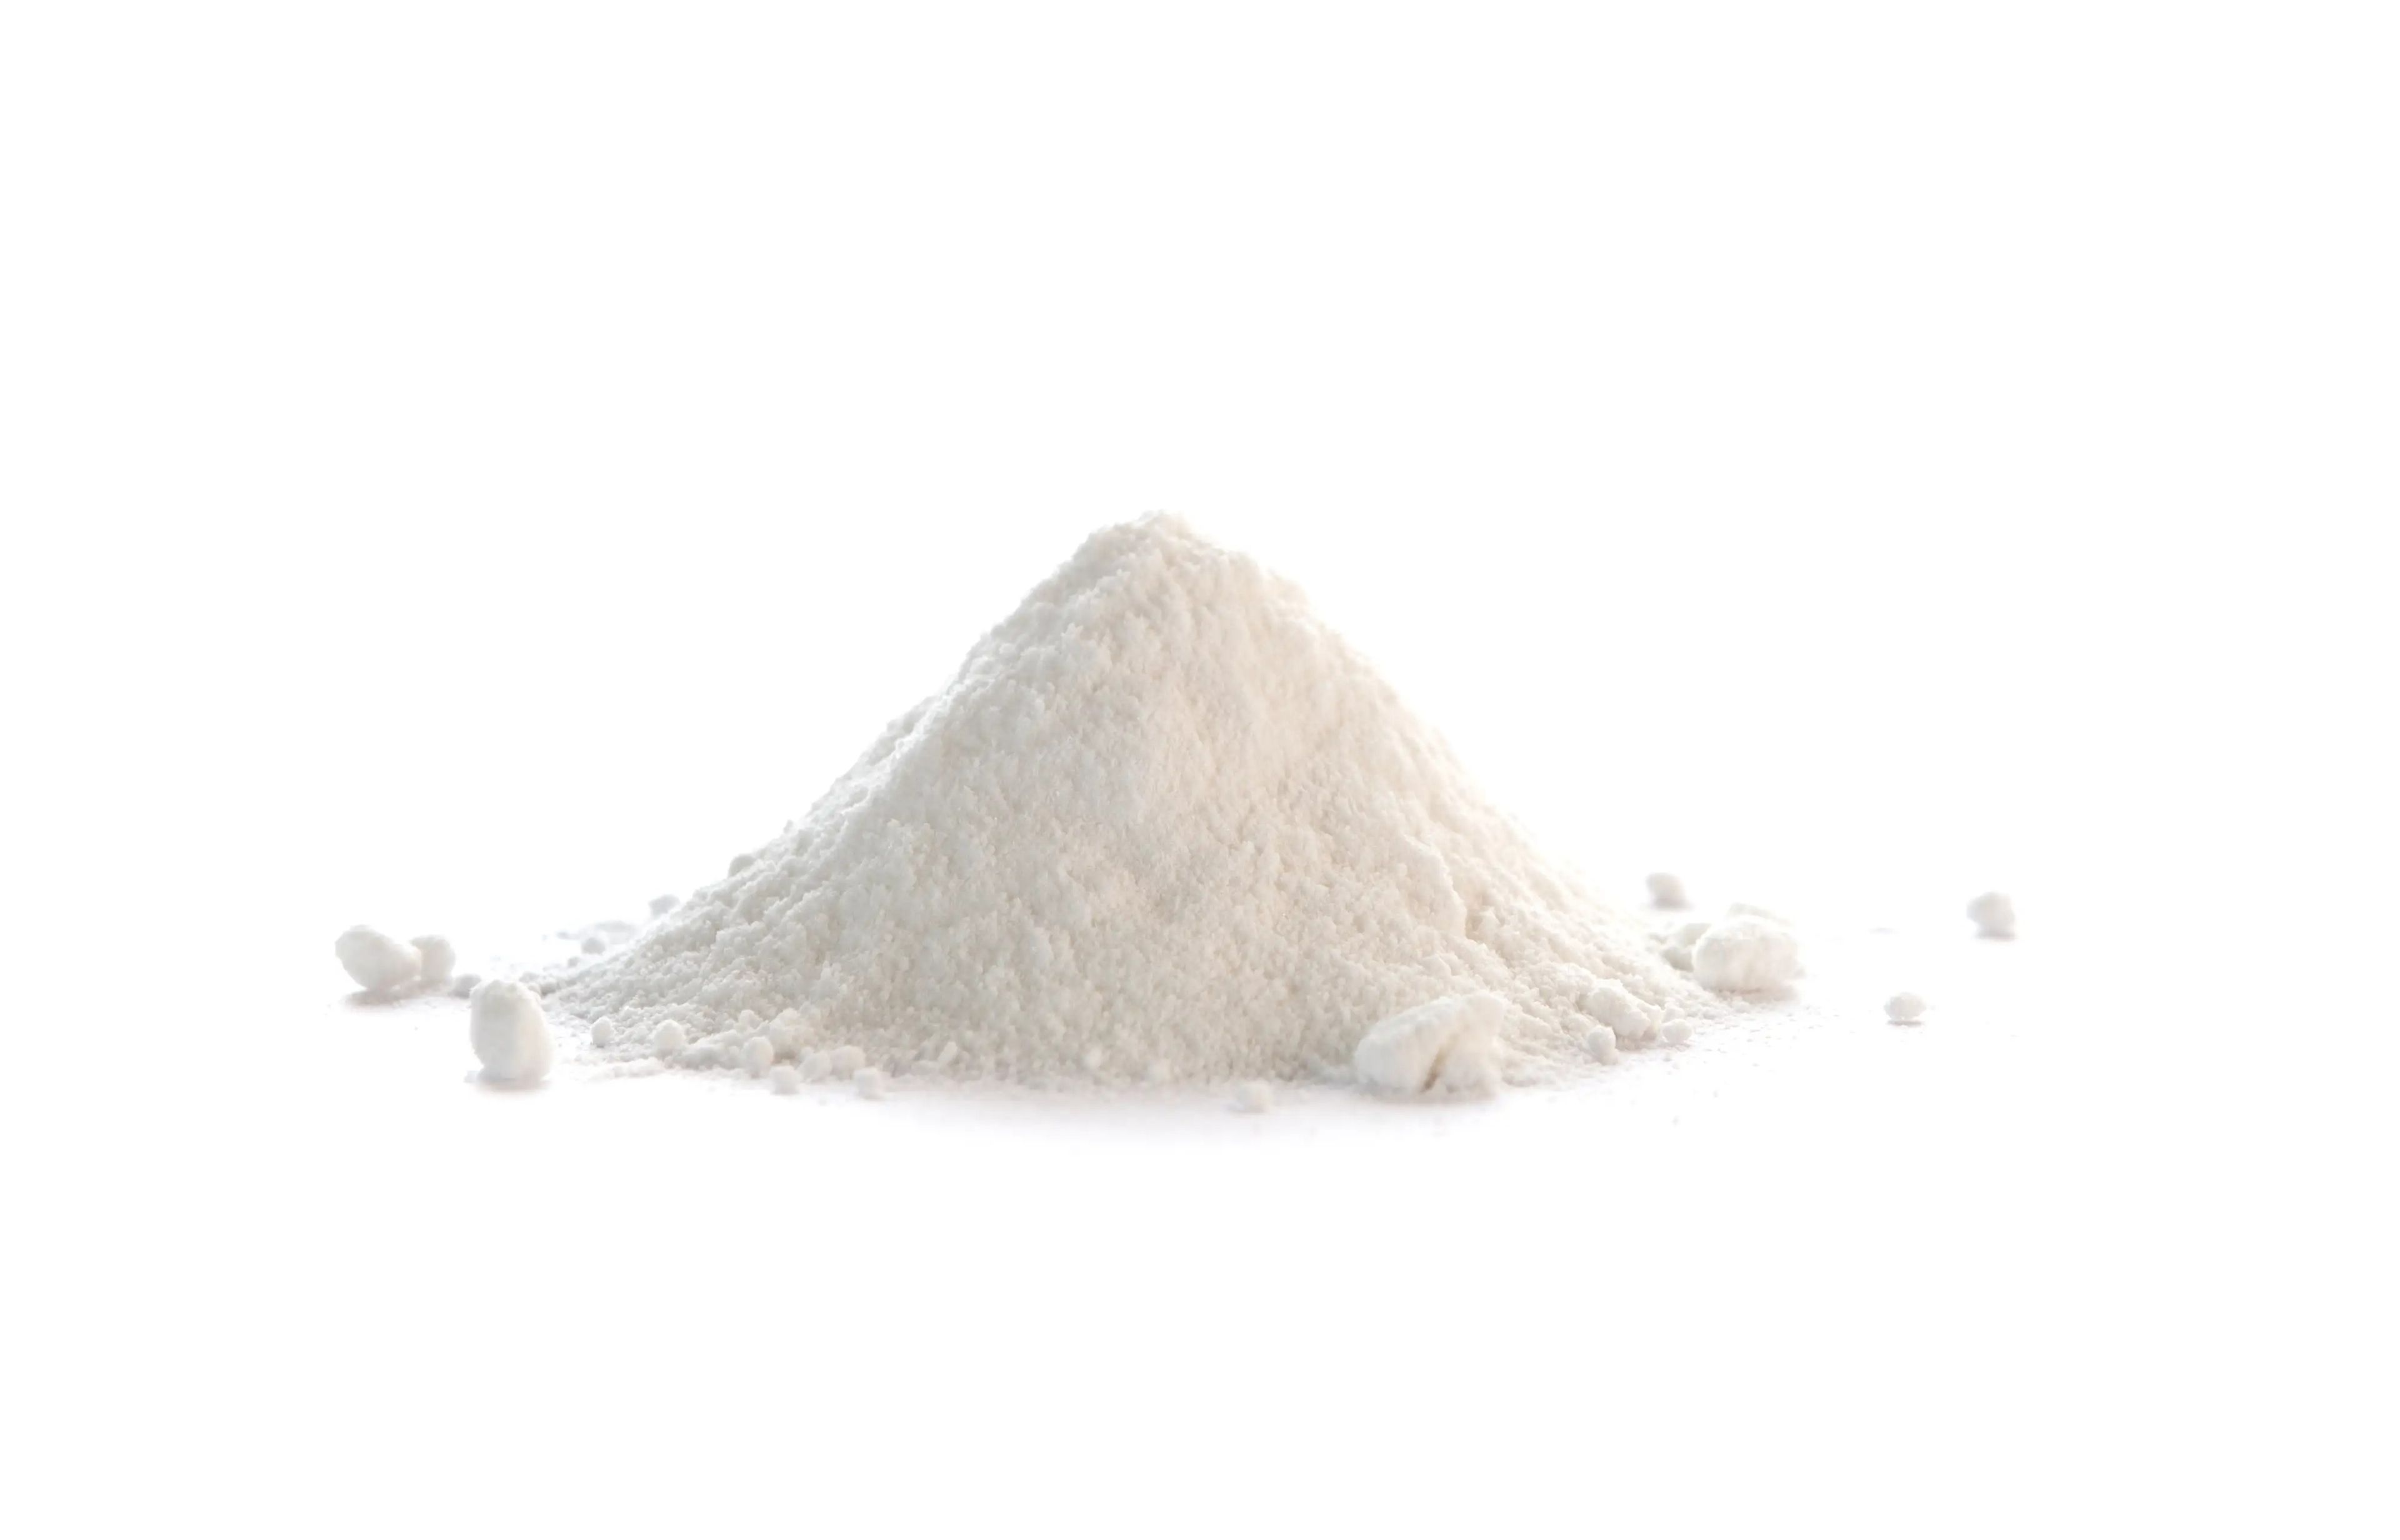 D-mannose is a type of sugar that can be purchased in powder or capsule form.